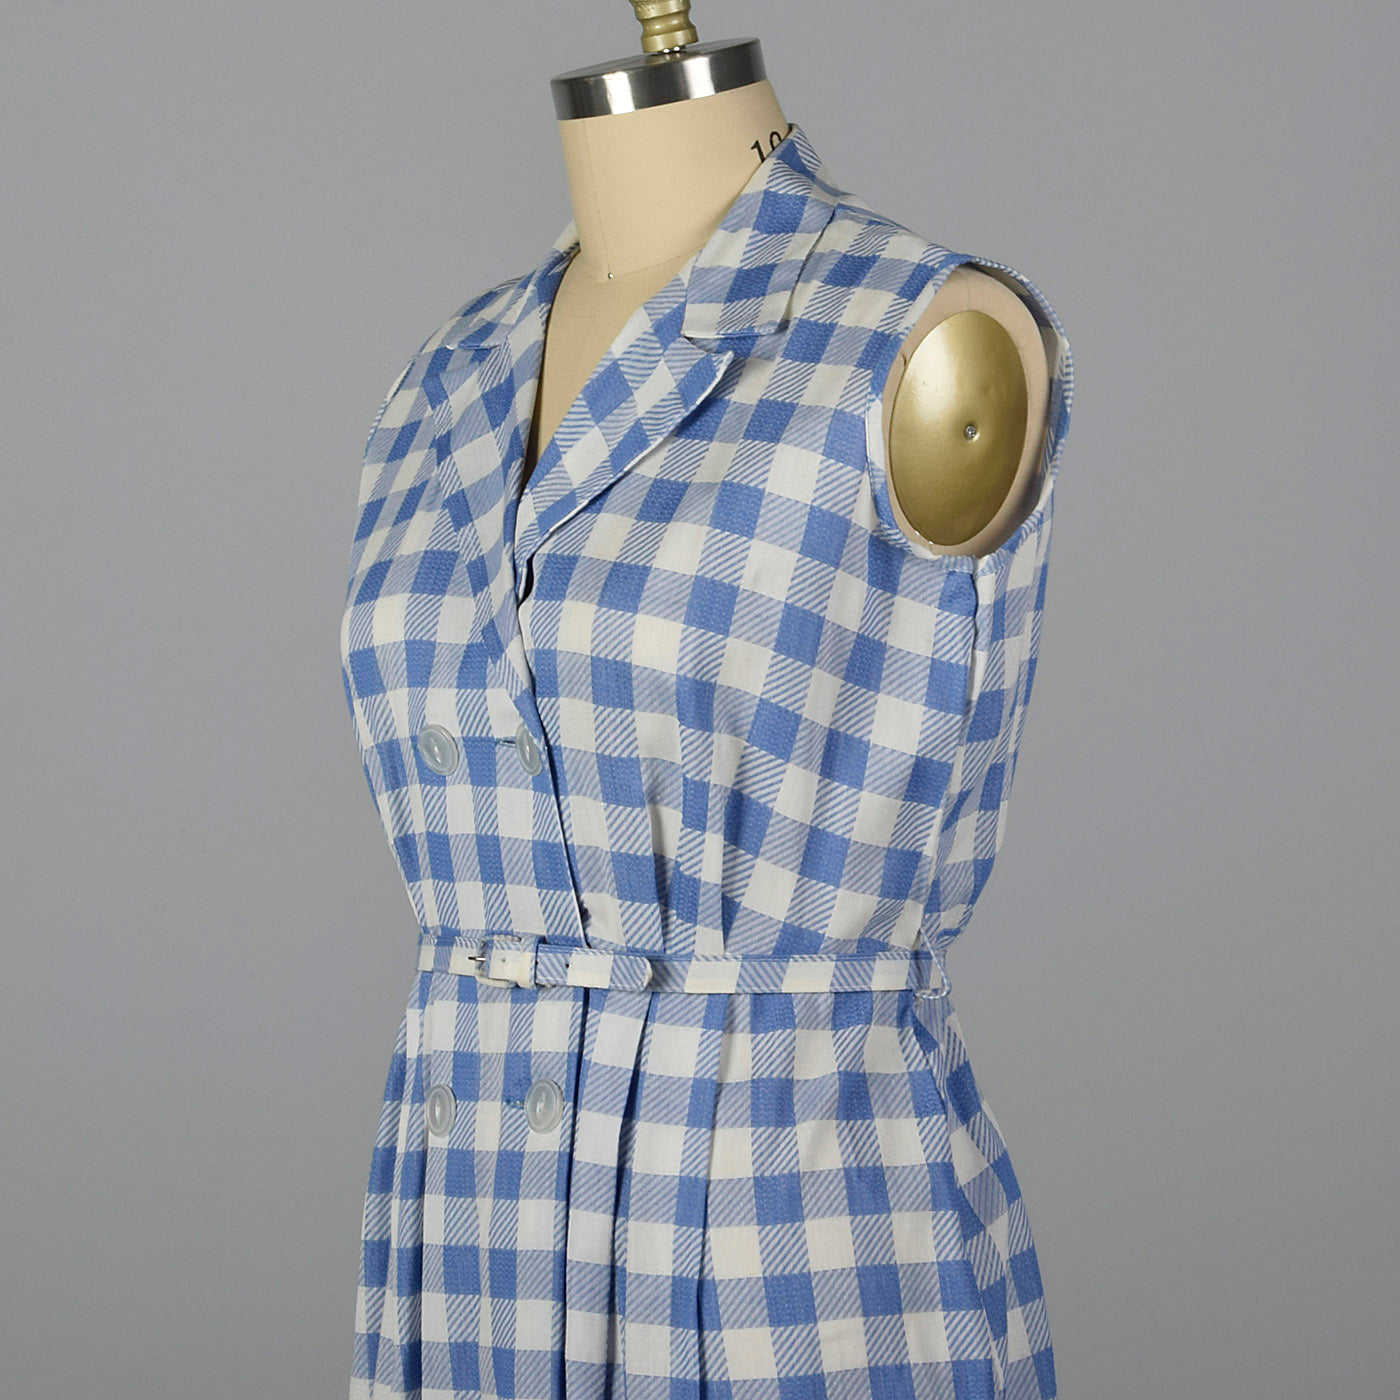 1950s Blue and White Gingham Day Dress